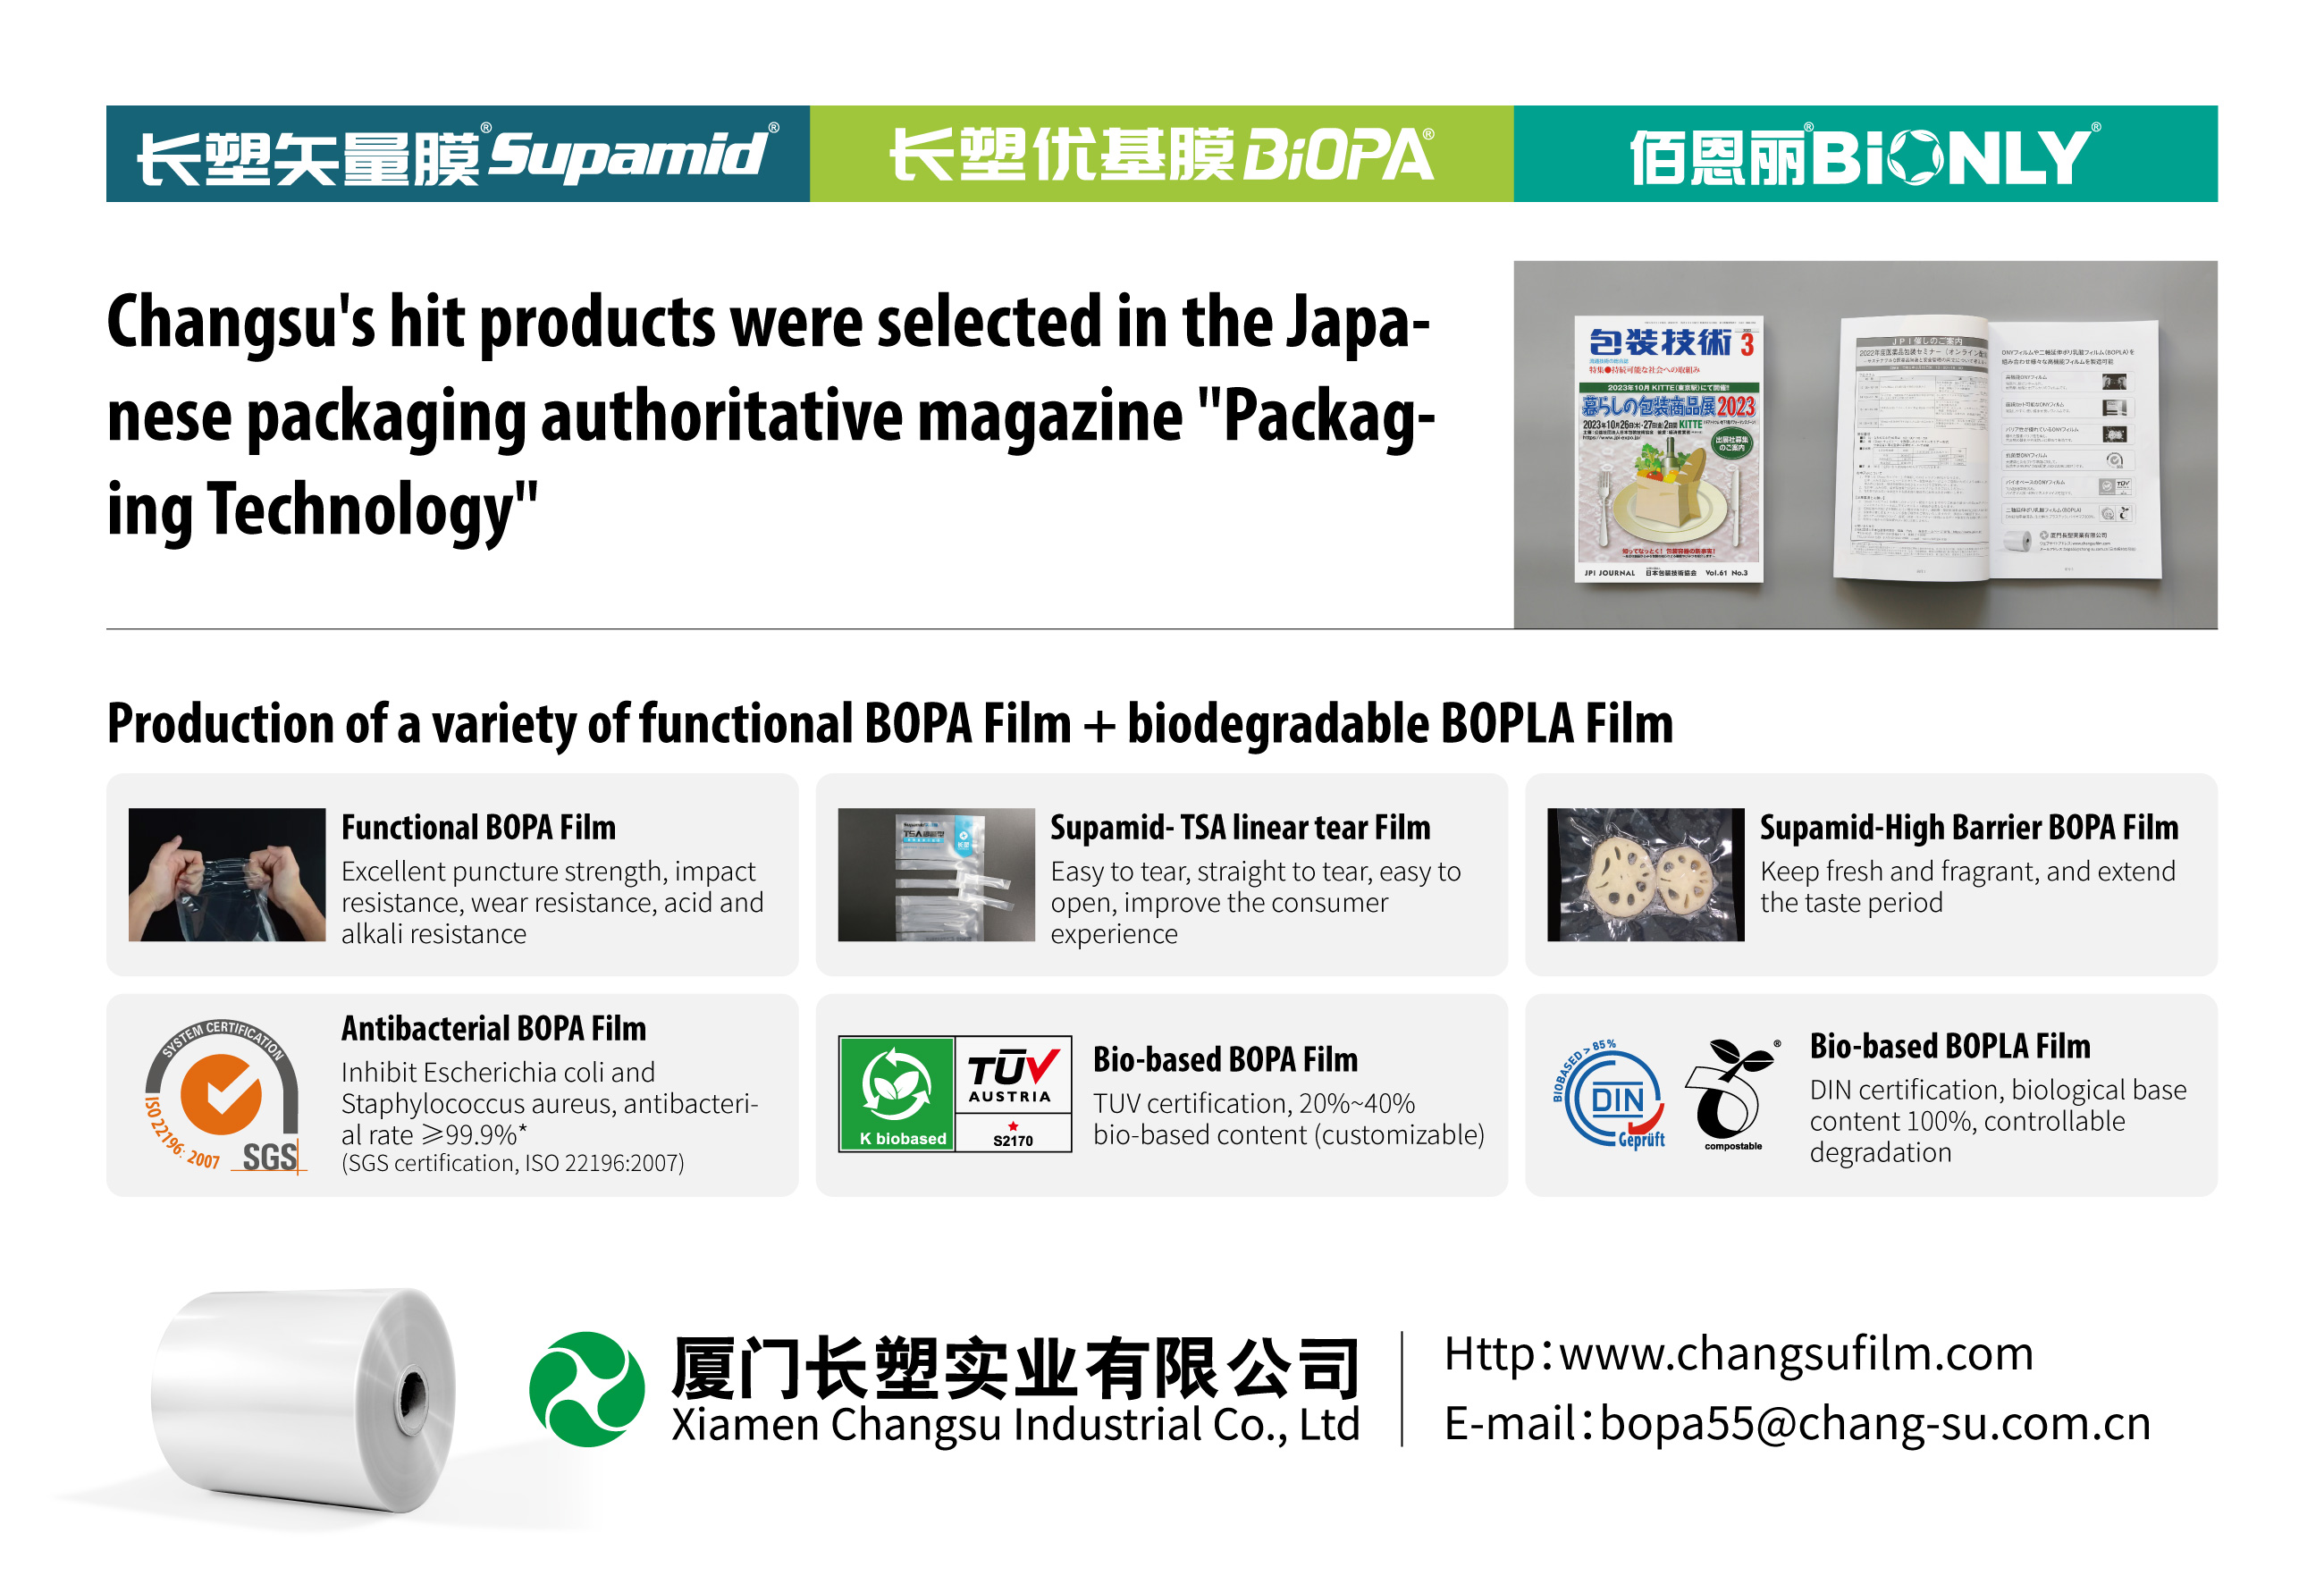 Changsu scriptor hit products delecti sunt in Iaponica packaging auctoritatis magazine "Packaging Technology"